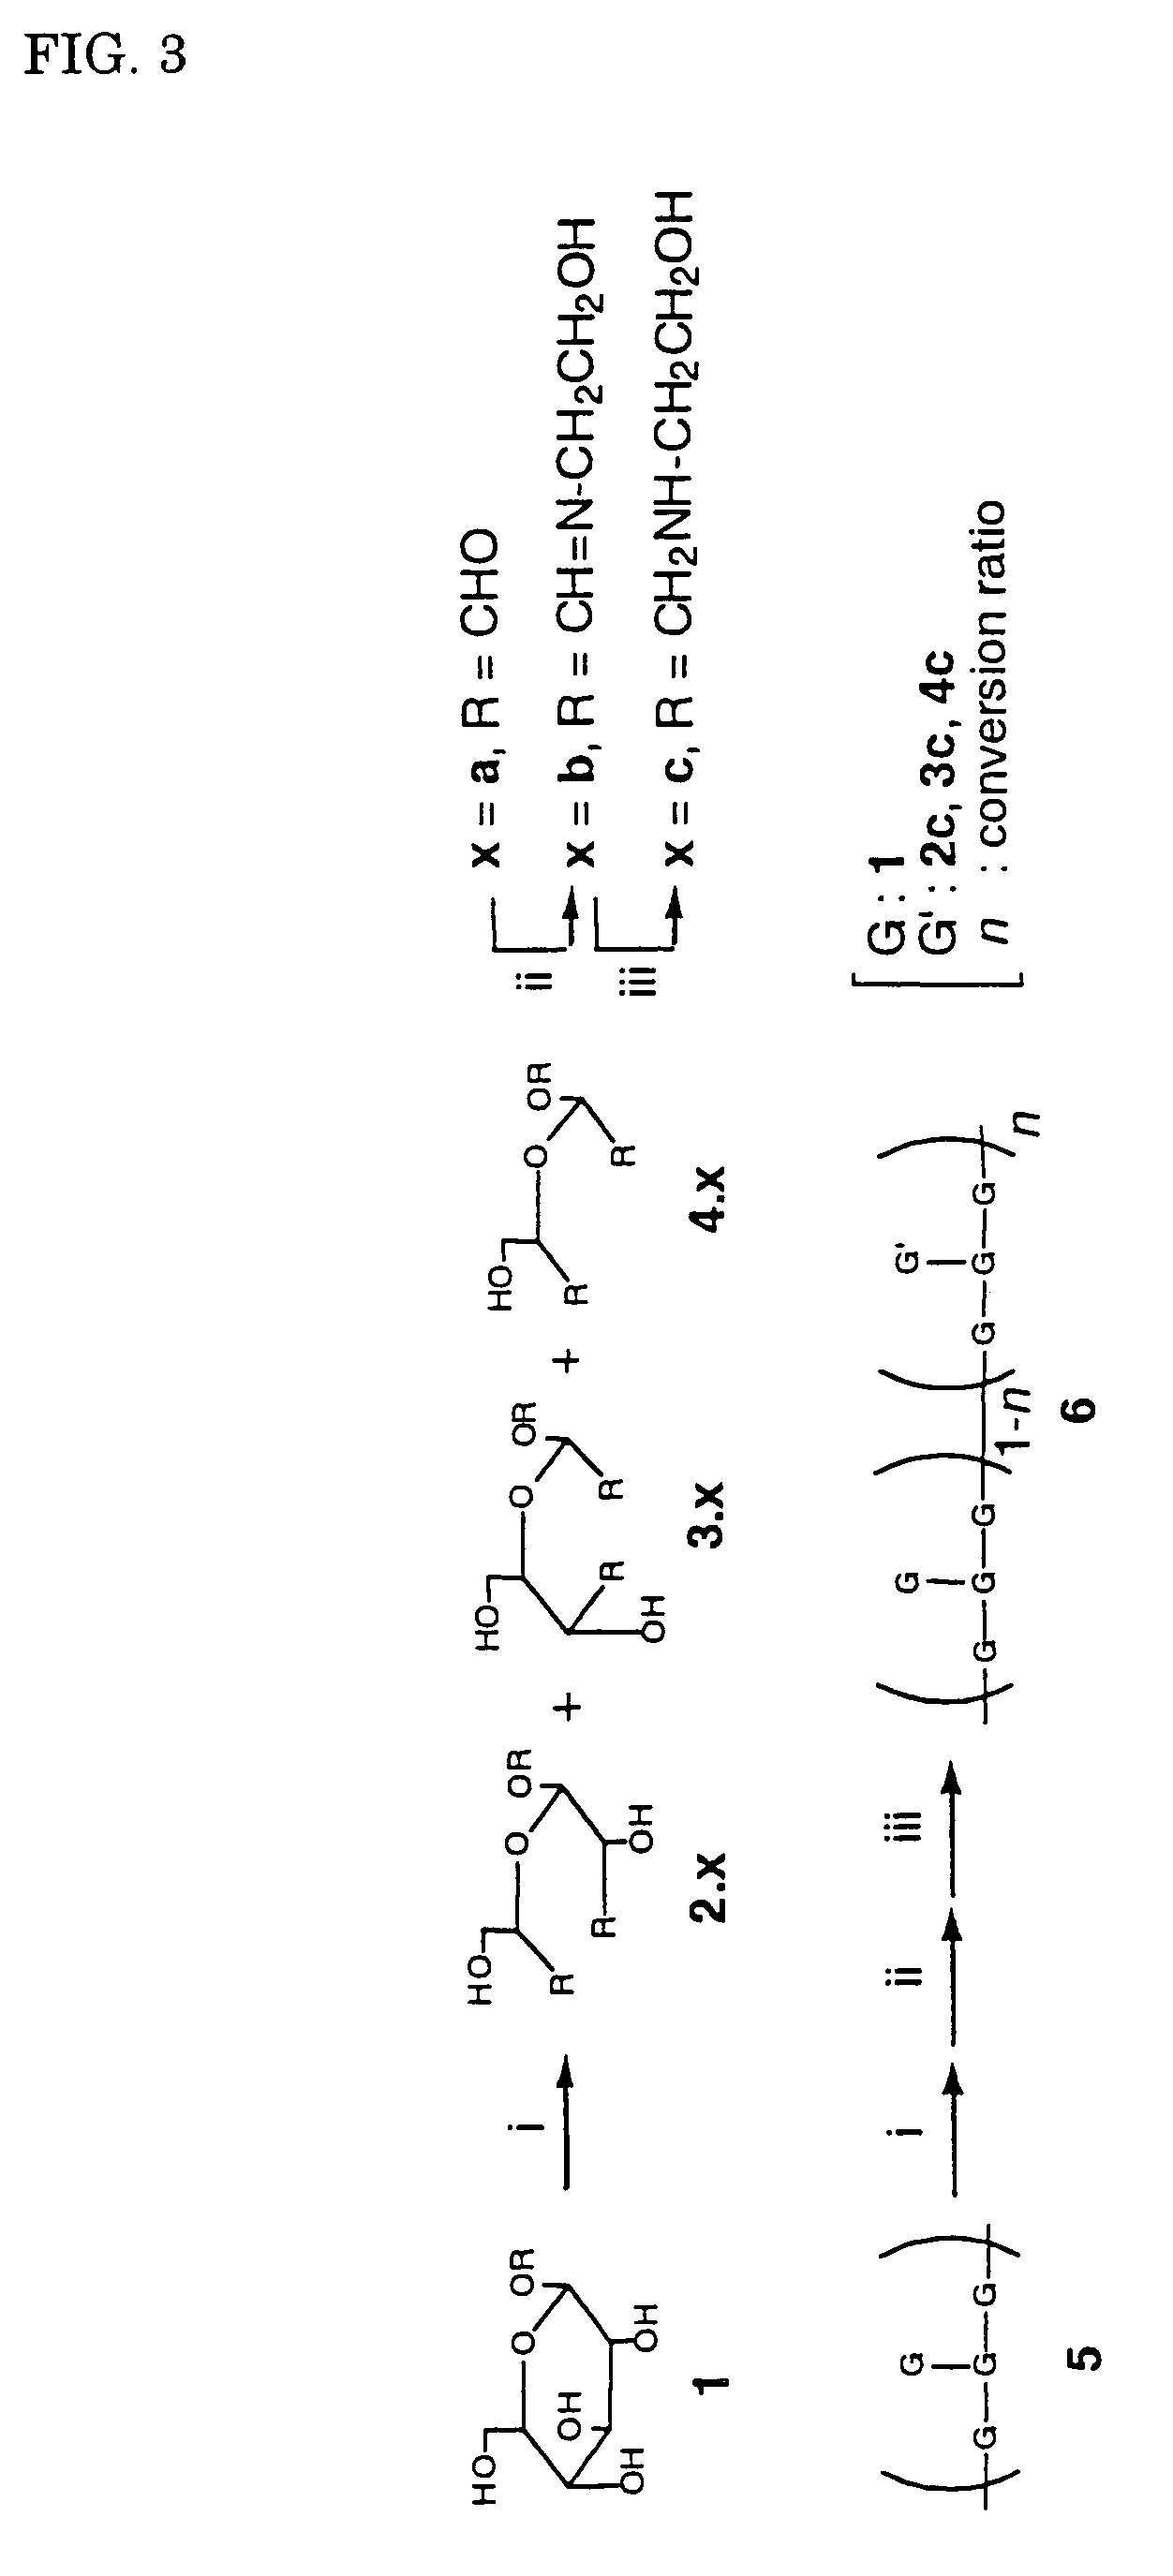 Gene carriers with the use of polysaccharide and process for producing the same